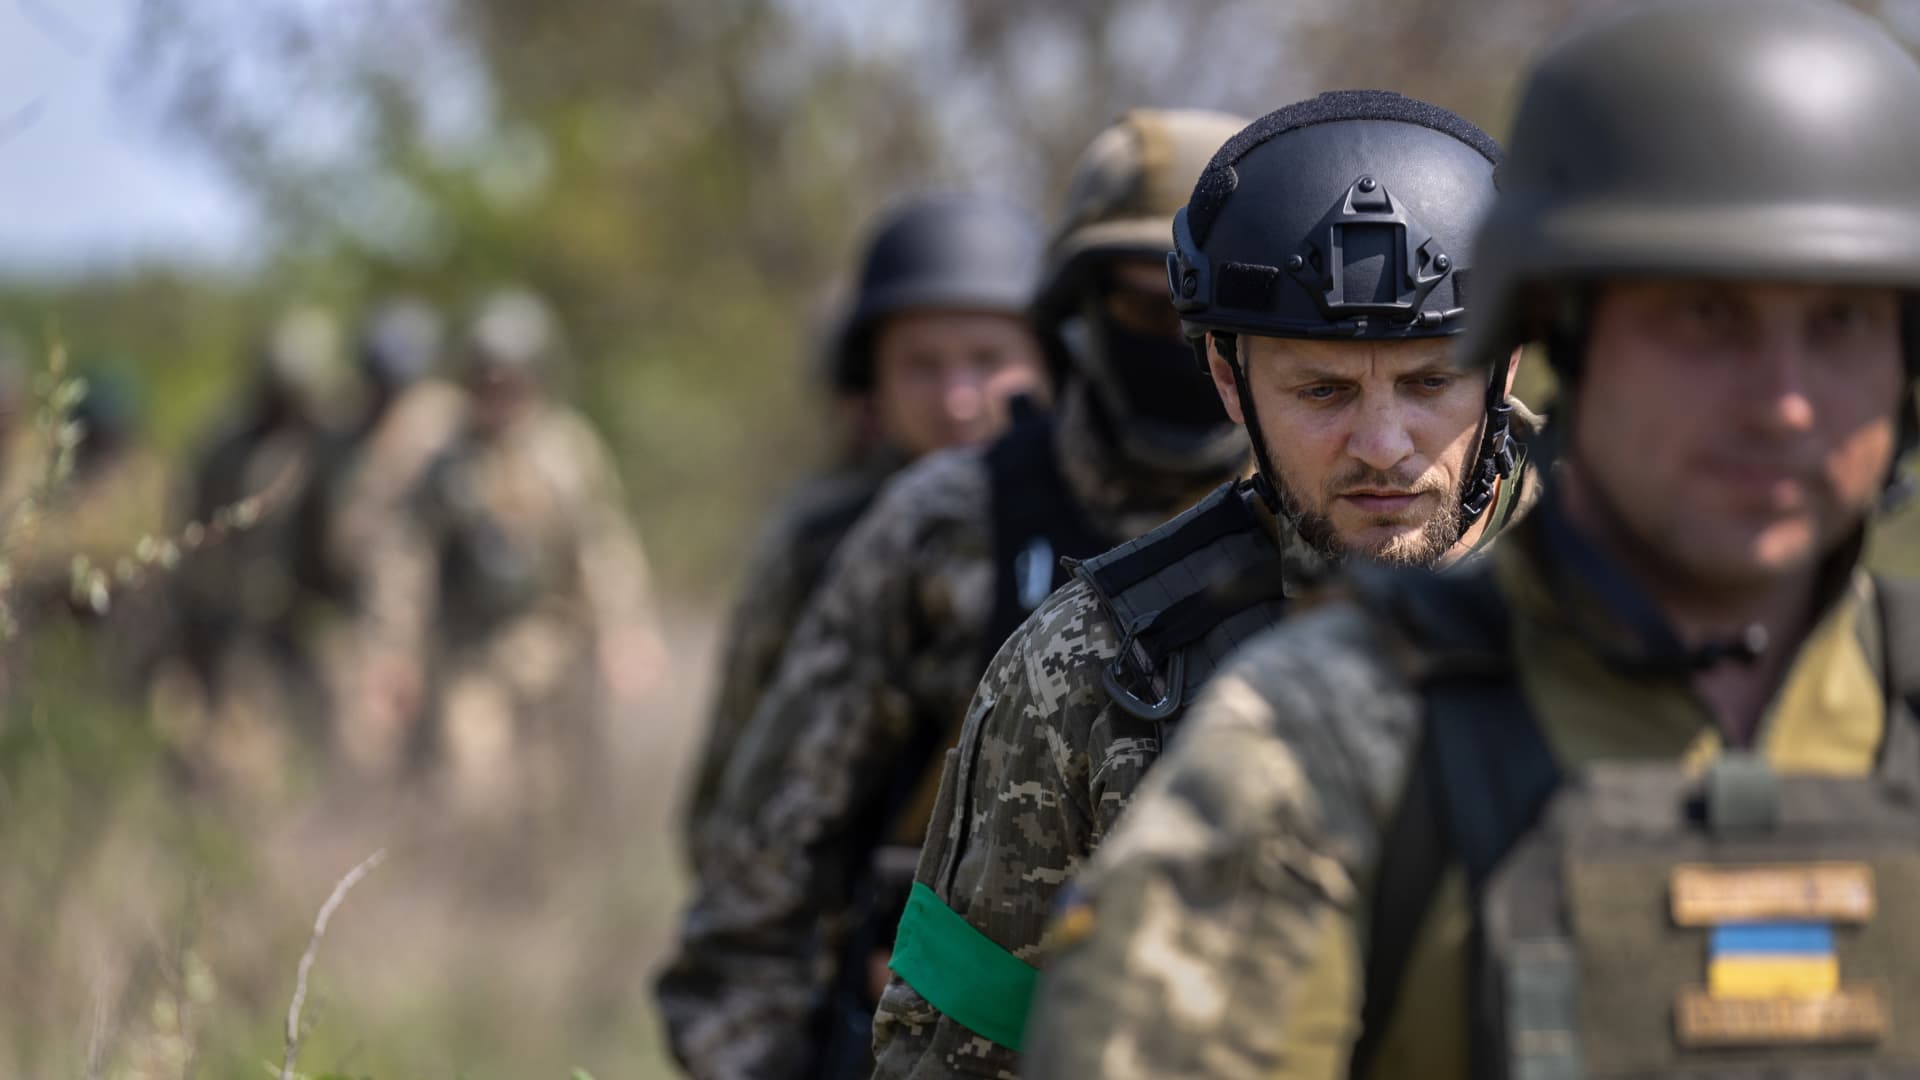 Ukrainian infantrymen train on May 9 in an area north of Kherson Oblast, most of which is controlled by Russia.